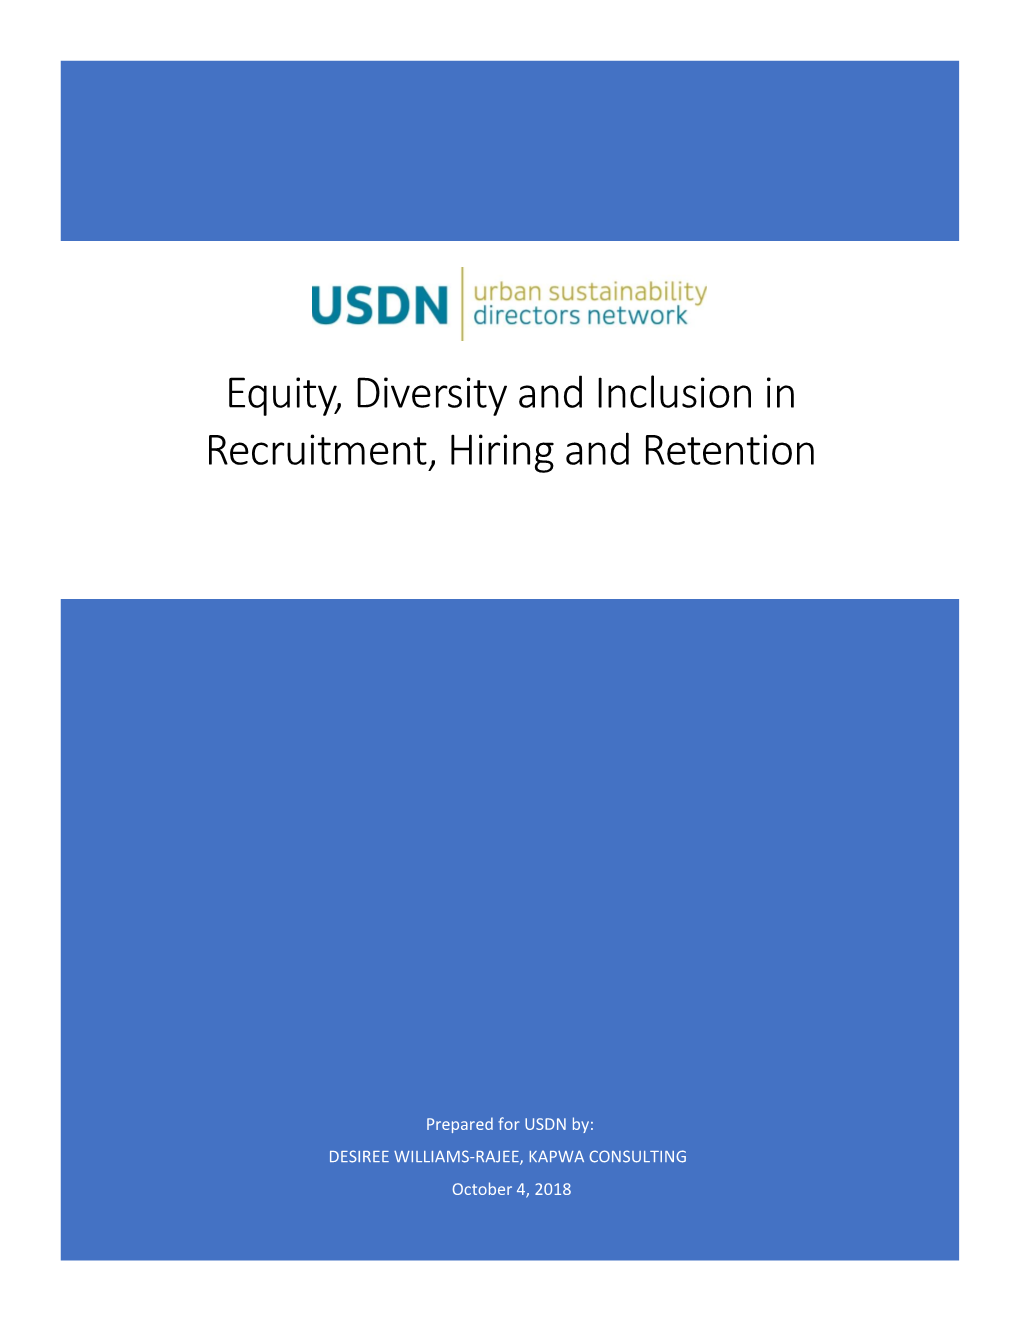 Equity, Diversity and Inclusion in Recruitment, Hiring and Retention